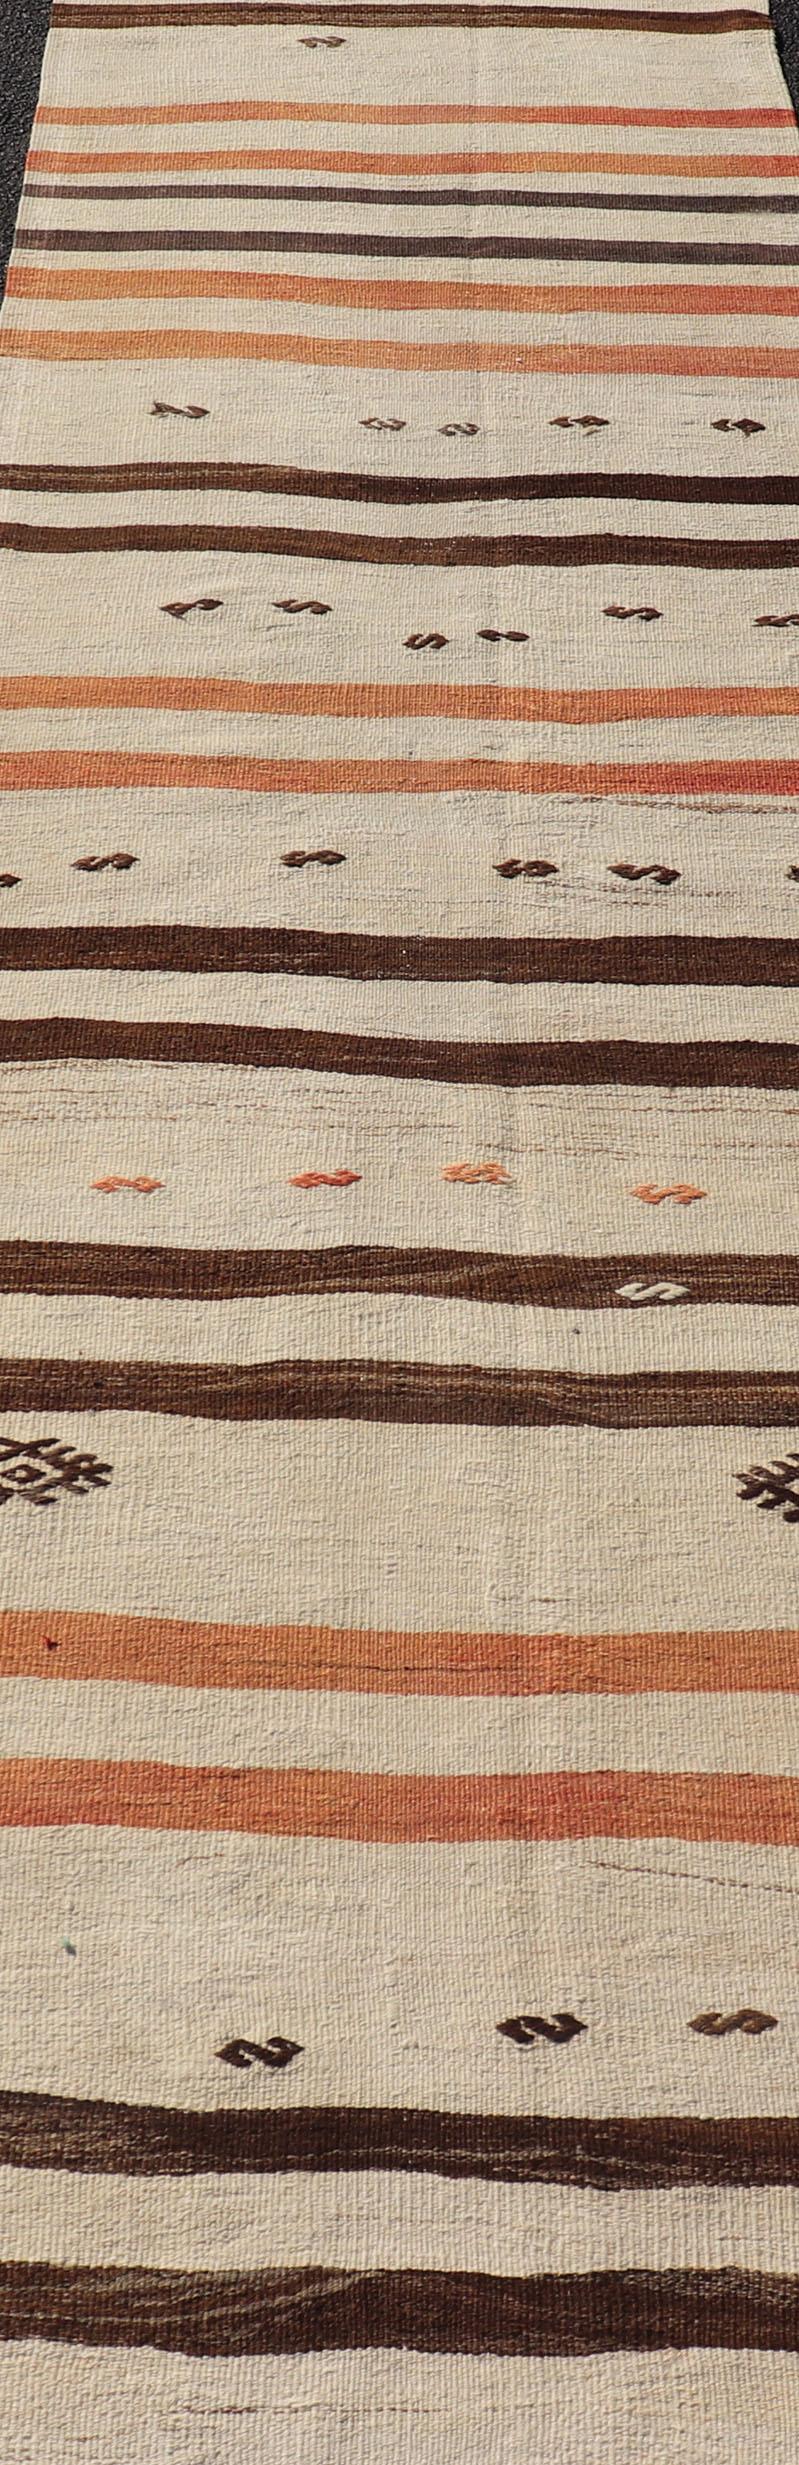 Wool Vintage Turkish Kilim Runner with Stripes in Cream, Brown & Soft Coral Color For Sale